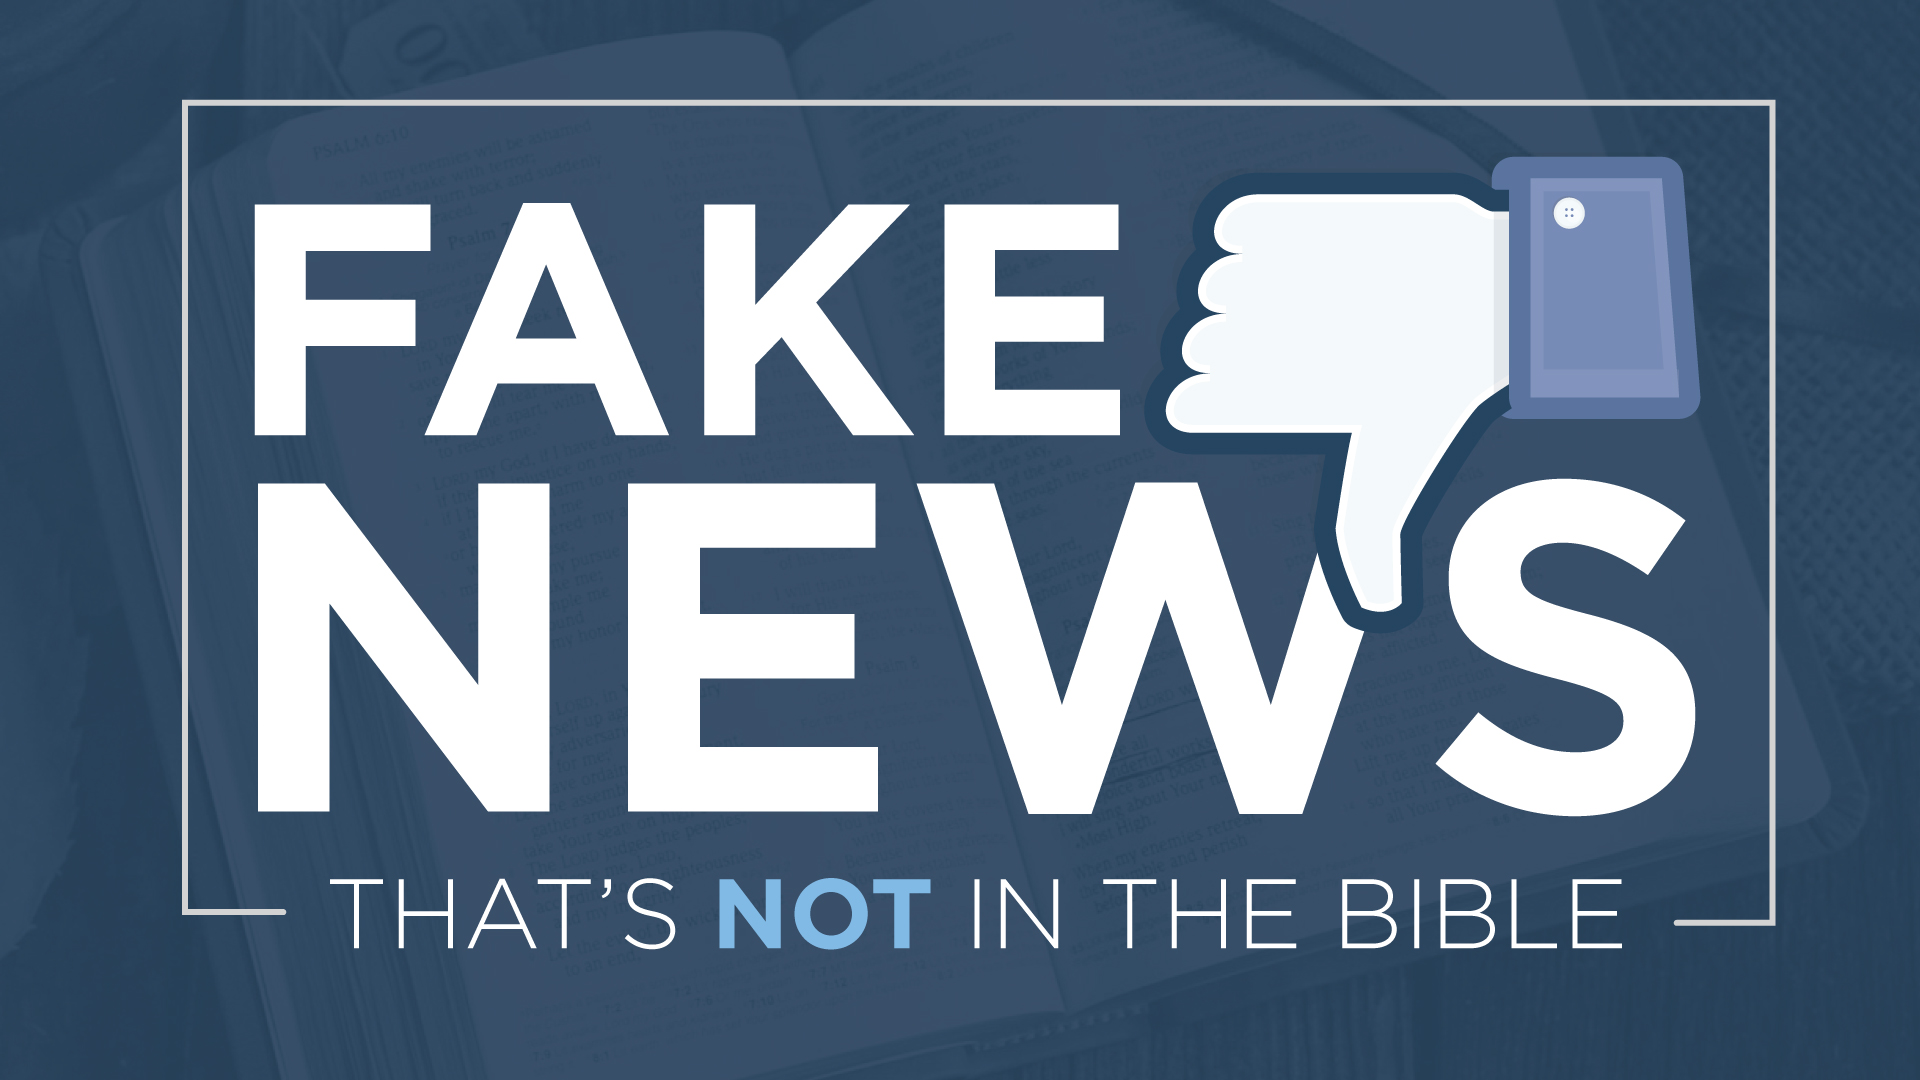 Fake News: That's Not in the Bible